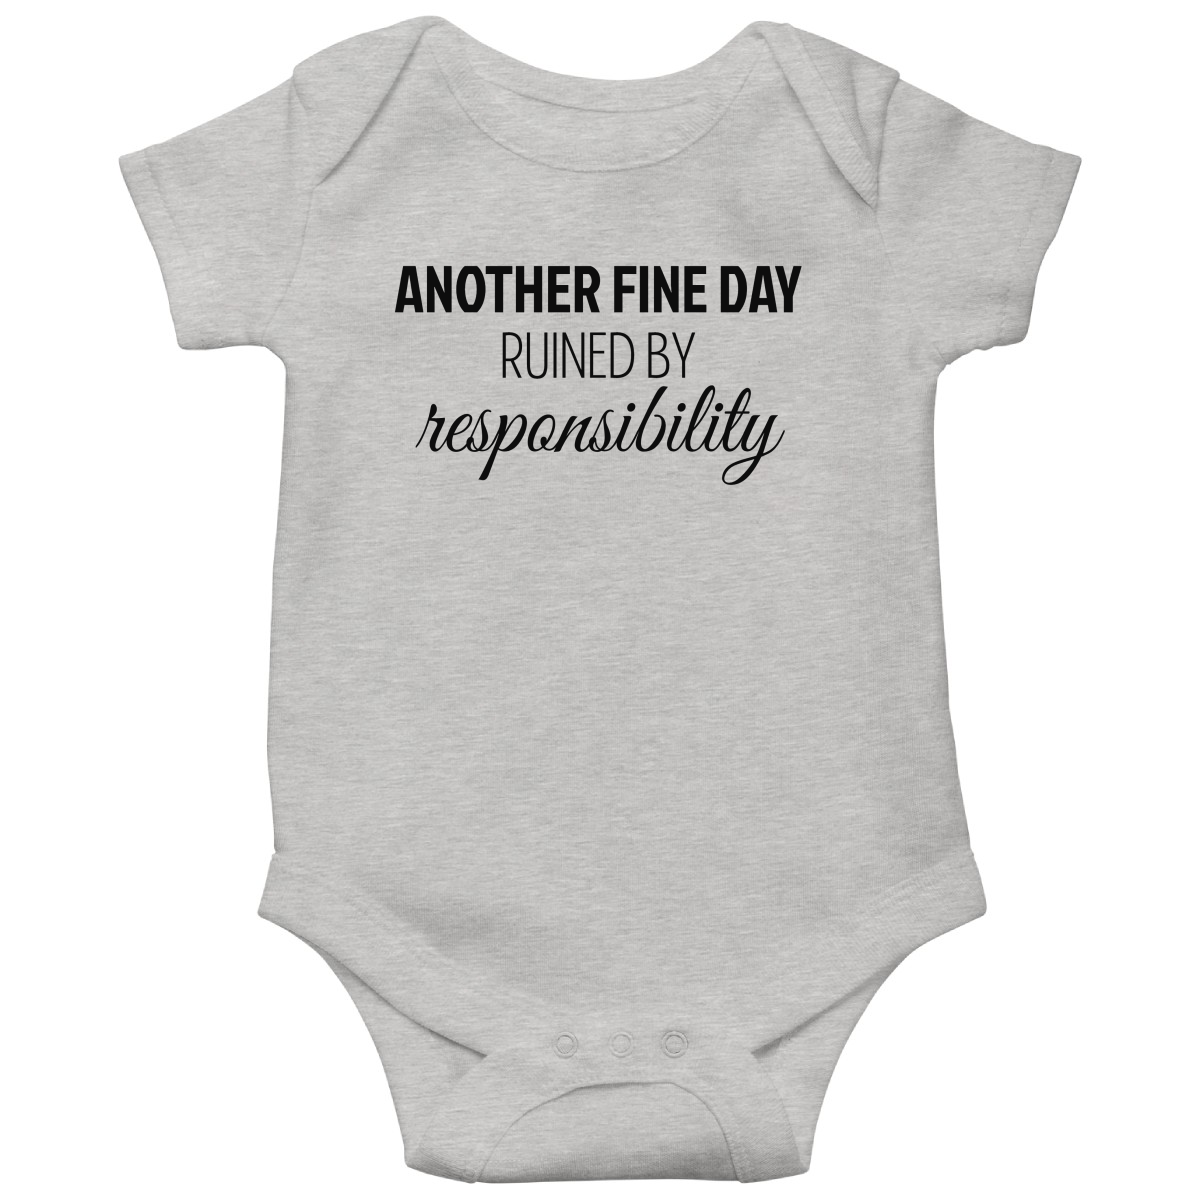 Another Fine Day Baby Bodysuits | Gray